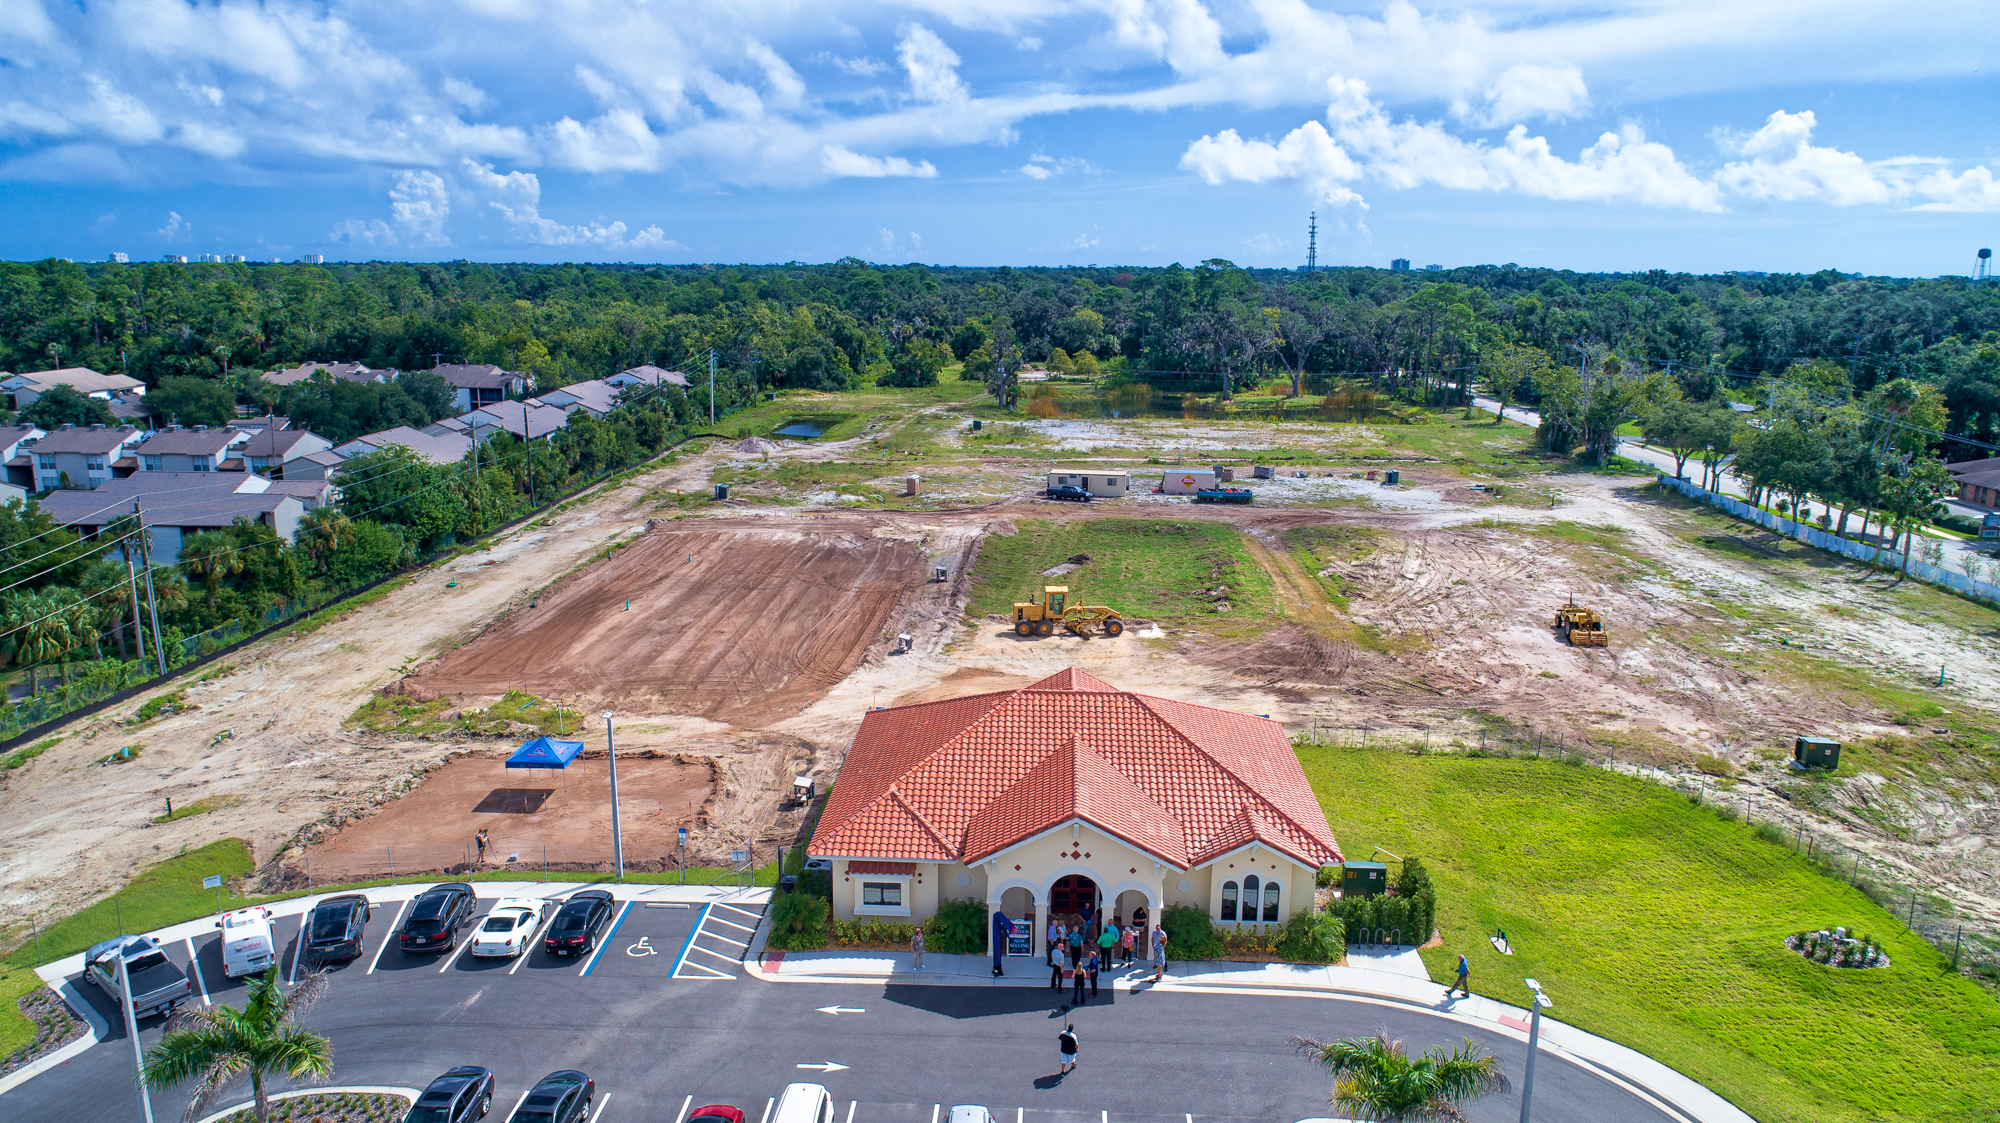 Ten buildings will eventually be built at the site on Sterthaus Drive. The clubhouse was constructed earlier this year. Courtesy photo by Katy Beals